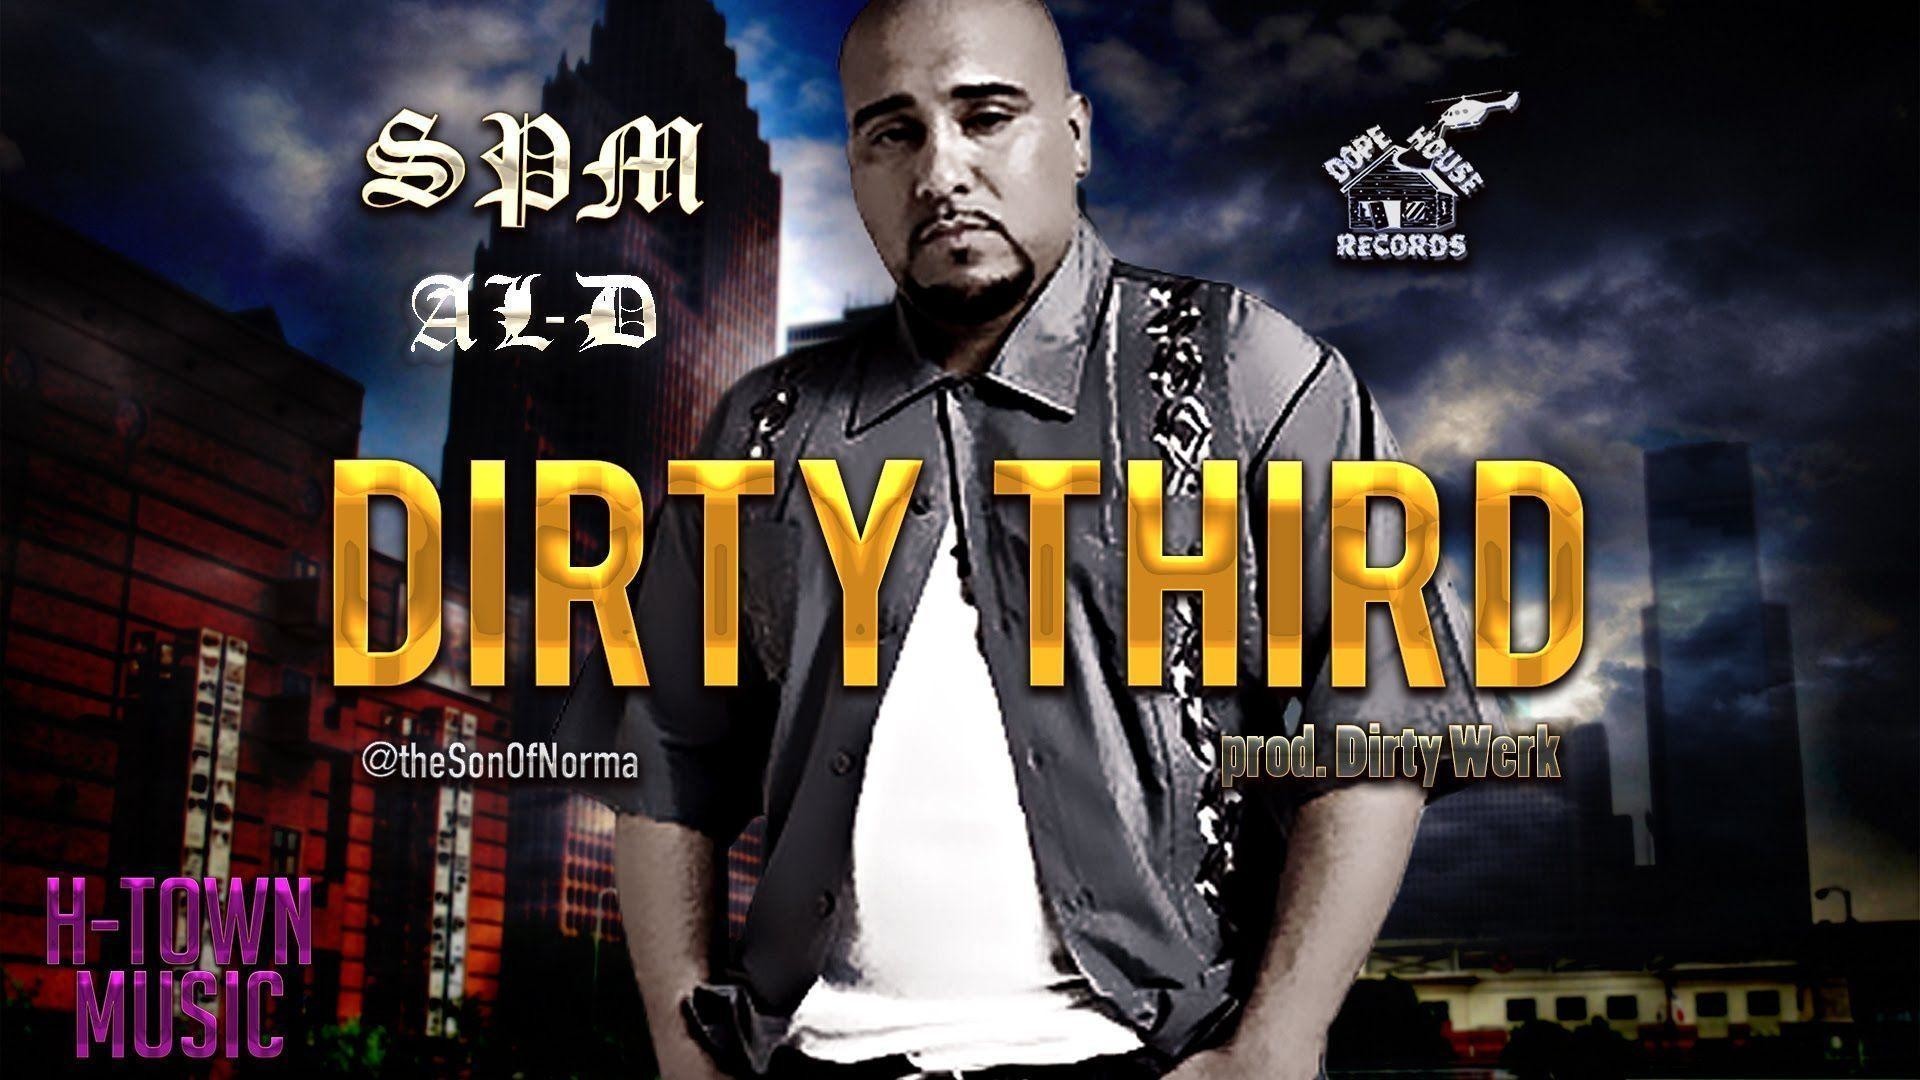 1920x1080  SPM - Dirty Third ft. Al-D (UNRELEASED) Screwed Up Click -